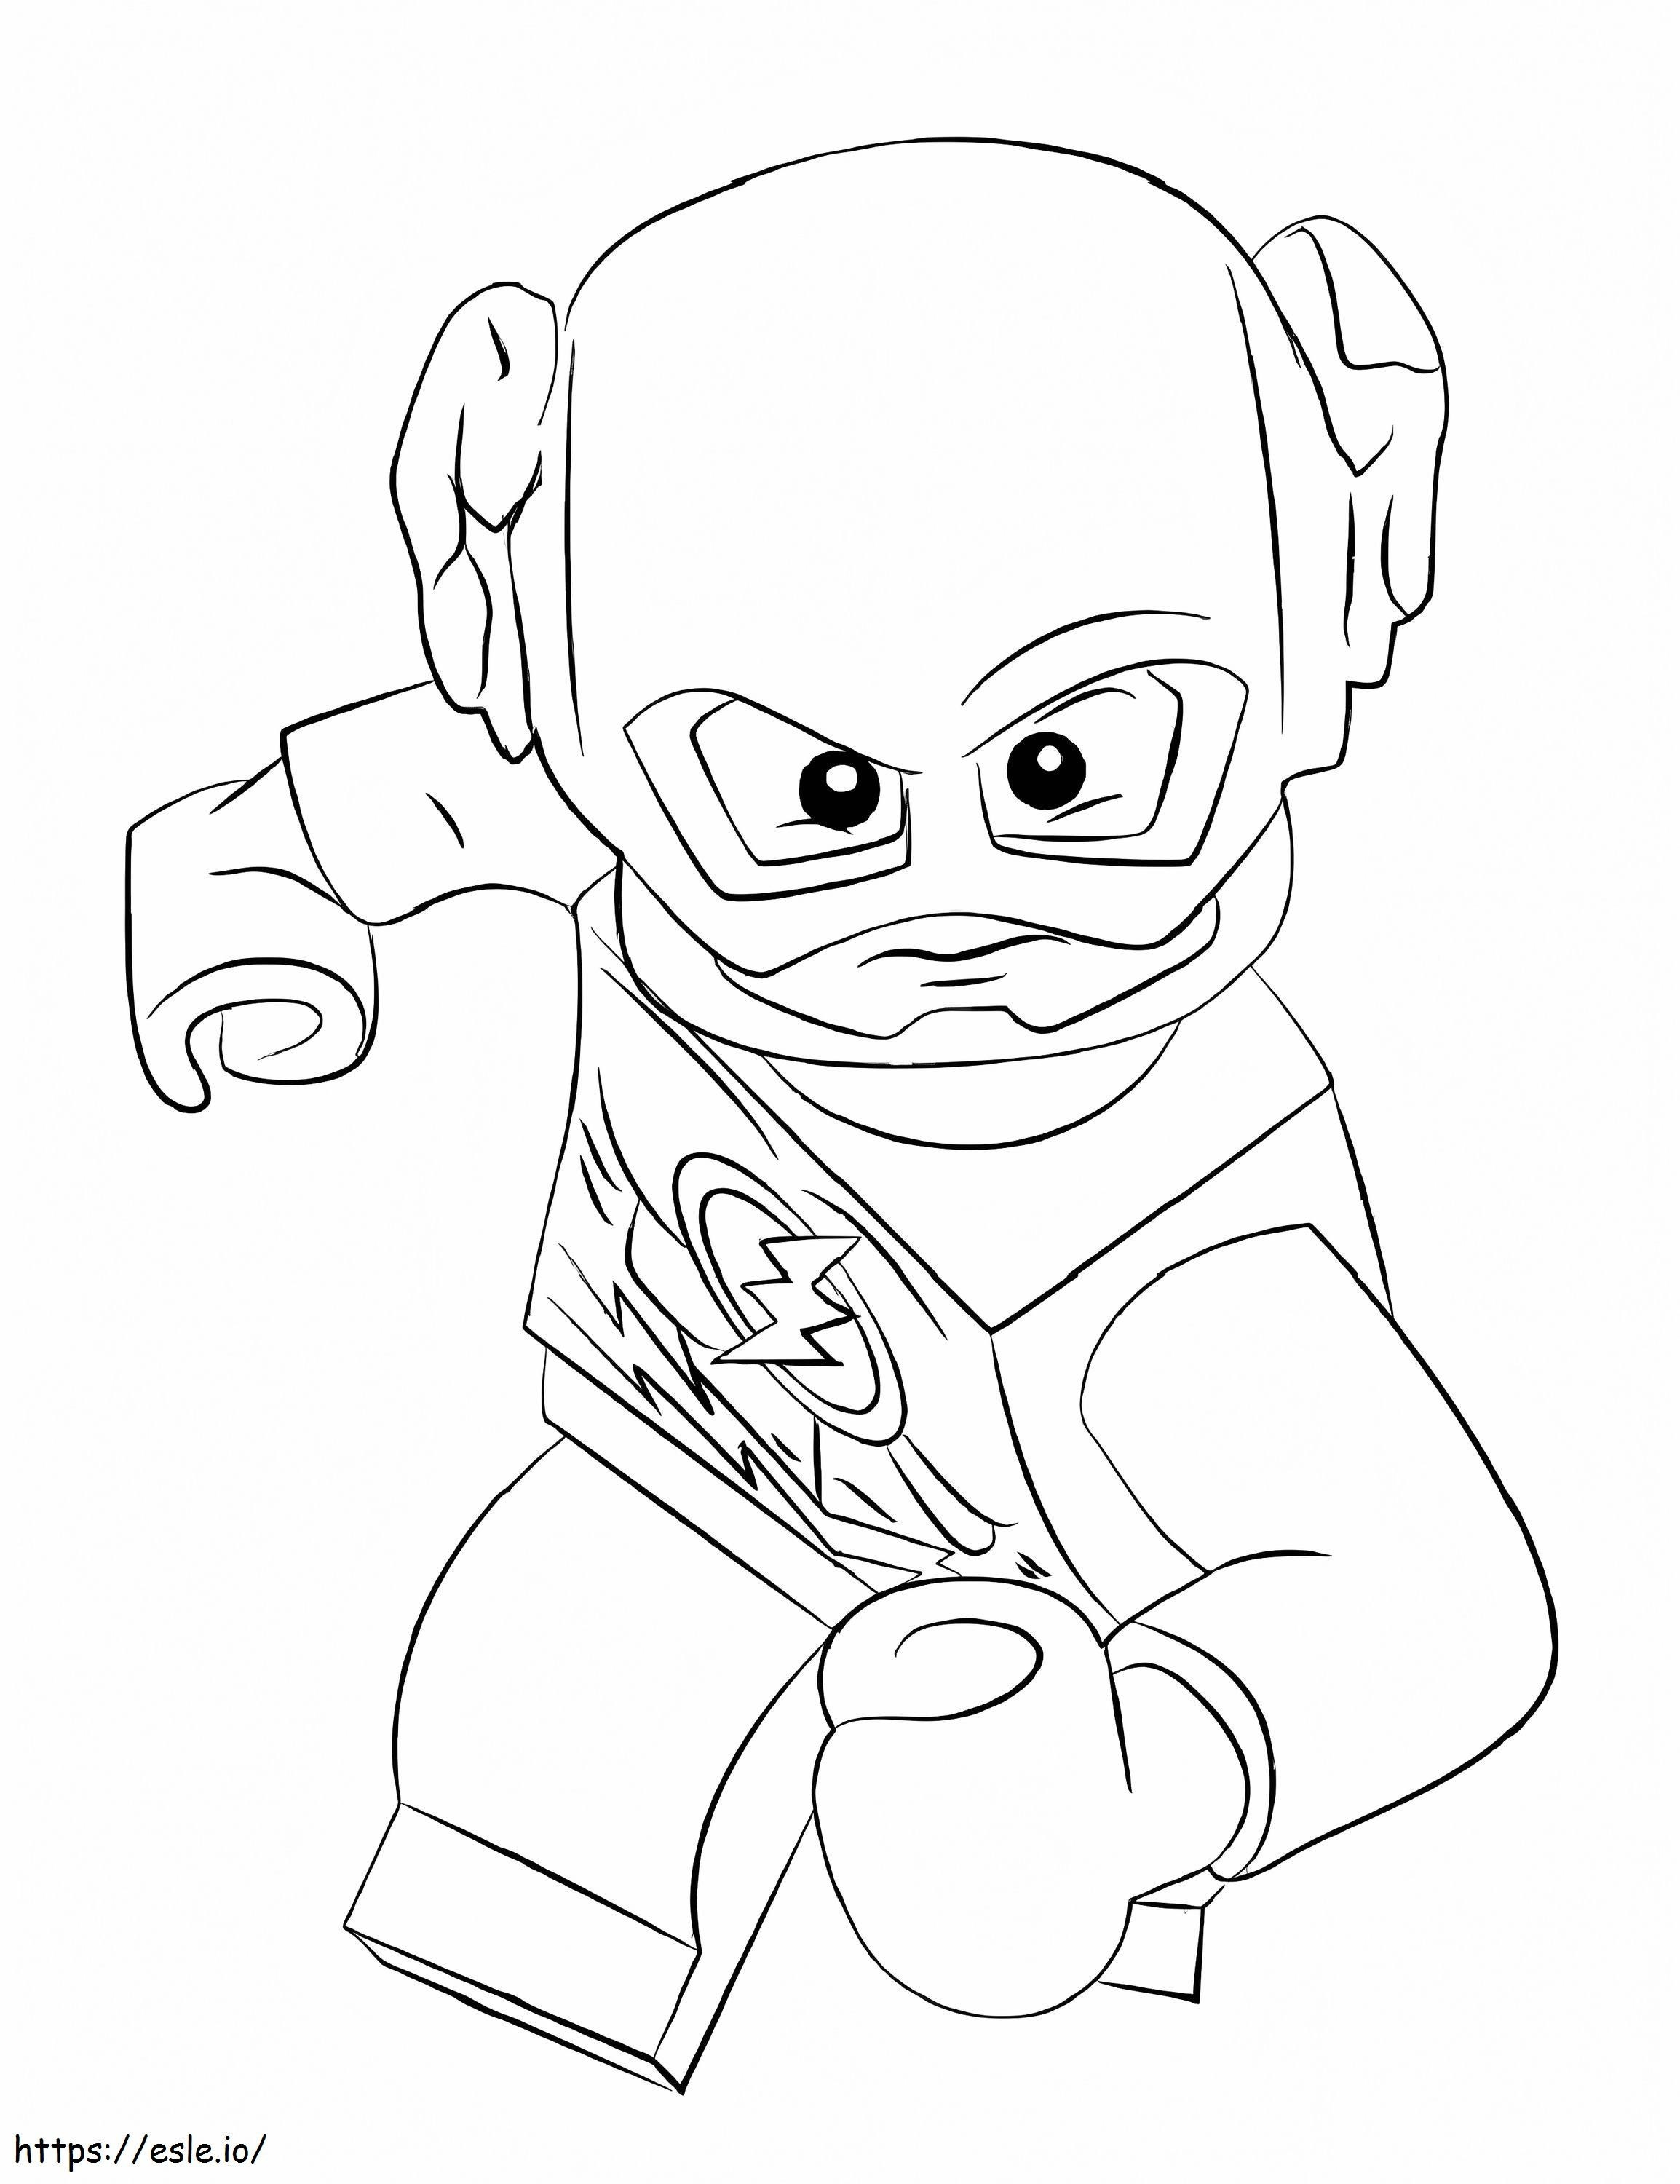 The Flash Lego coloring page